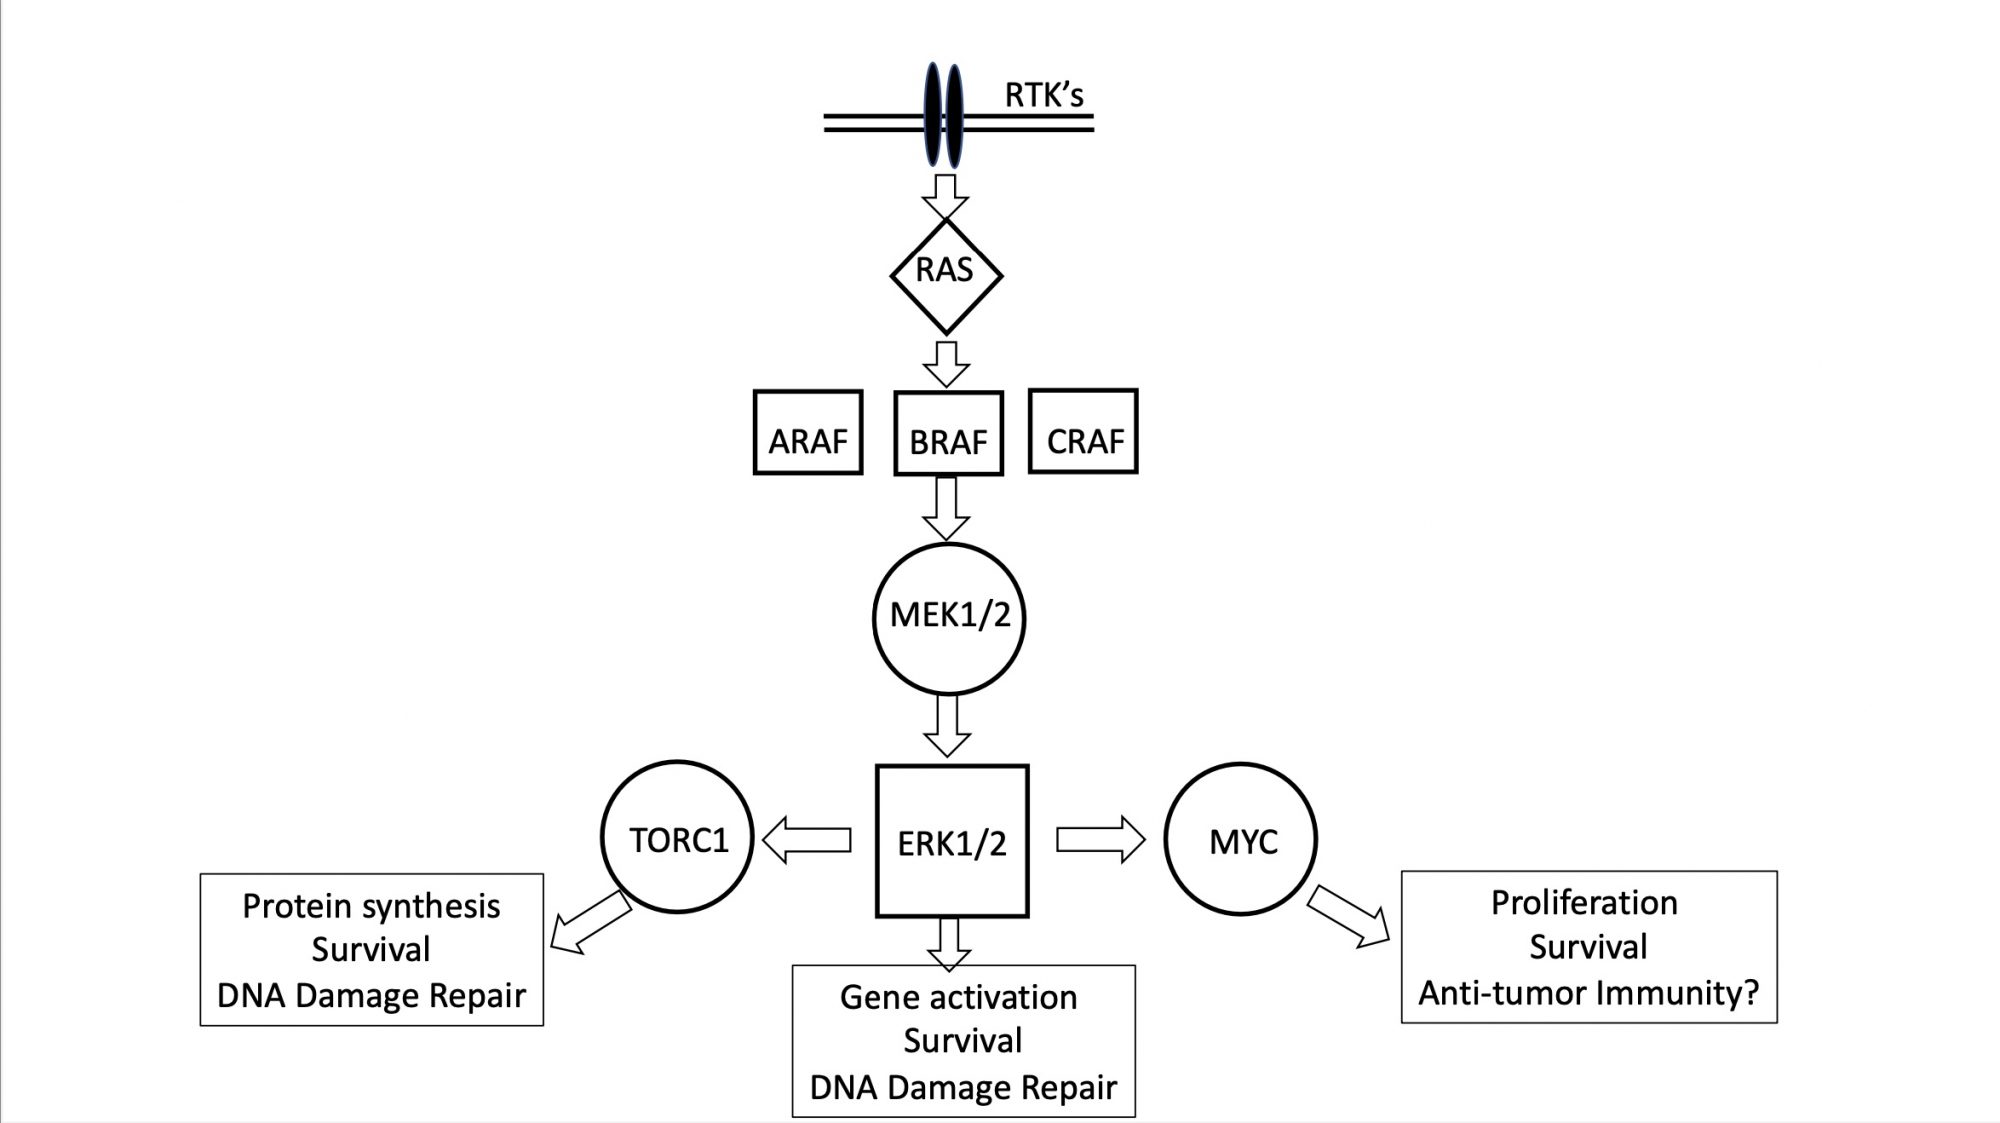 In normal cells, MAPK activation occurs after growth factor binding to membrane-bound RTKs. In glioma cells, activating mutations of BRAF abrogate the requirement for growth factor binding and constitutively activate downstream components of the pathway leading to proliferation and survival